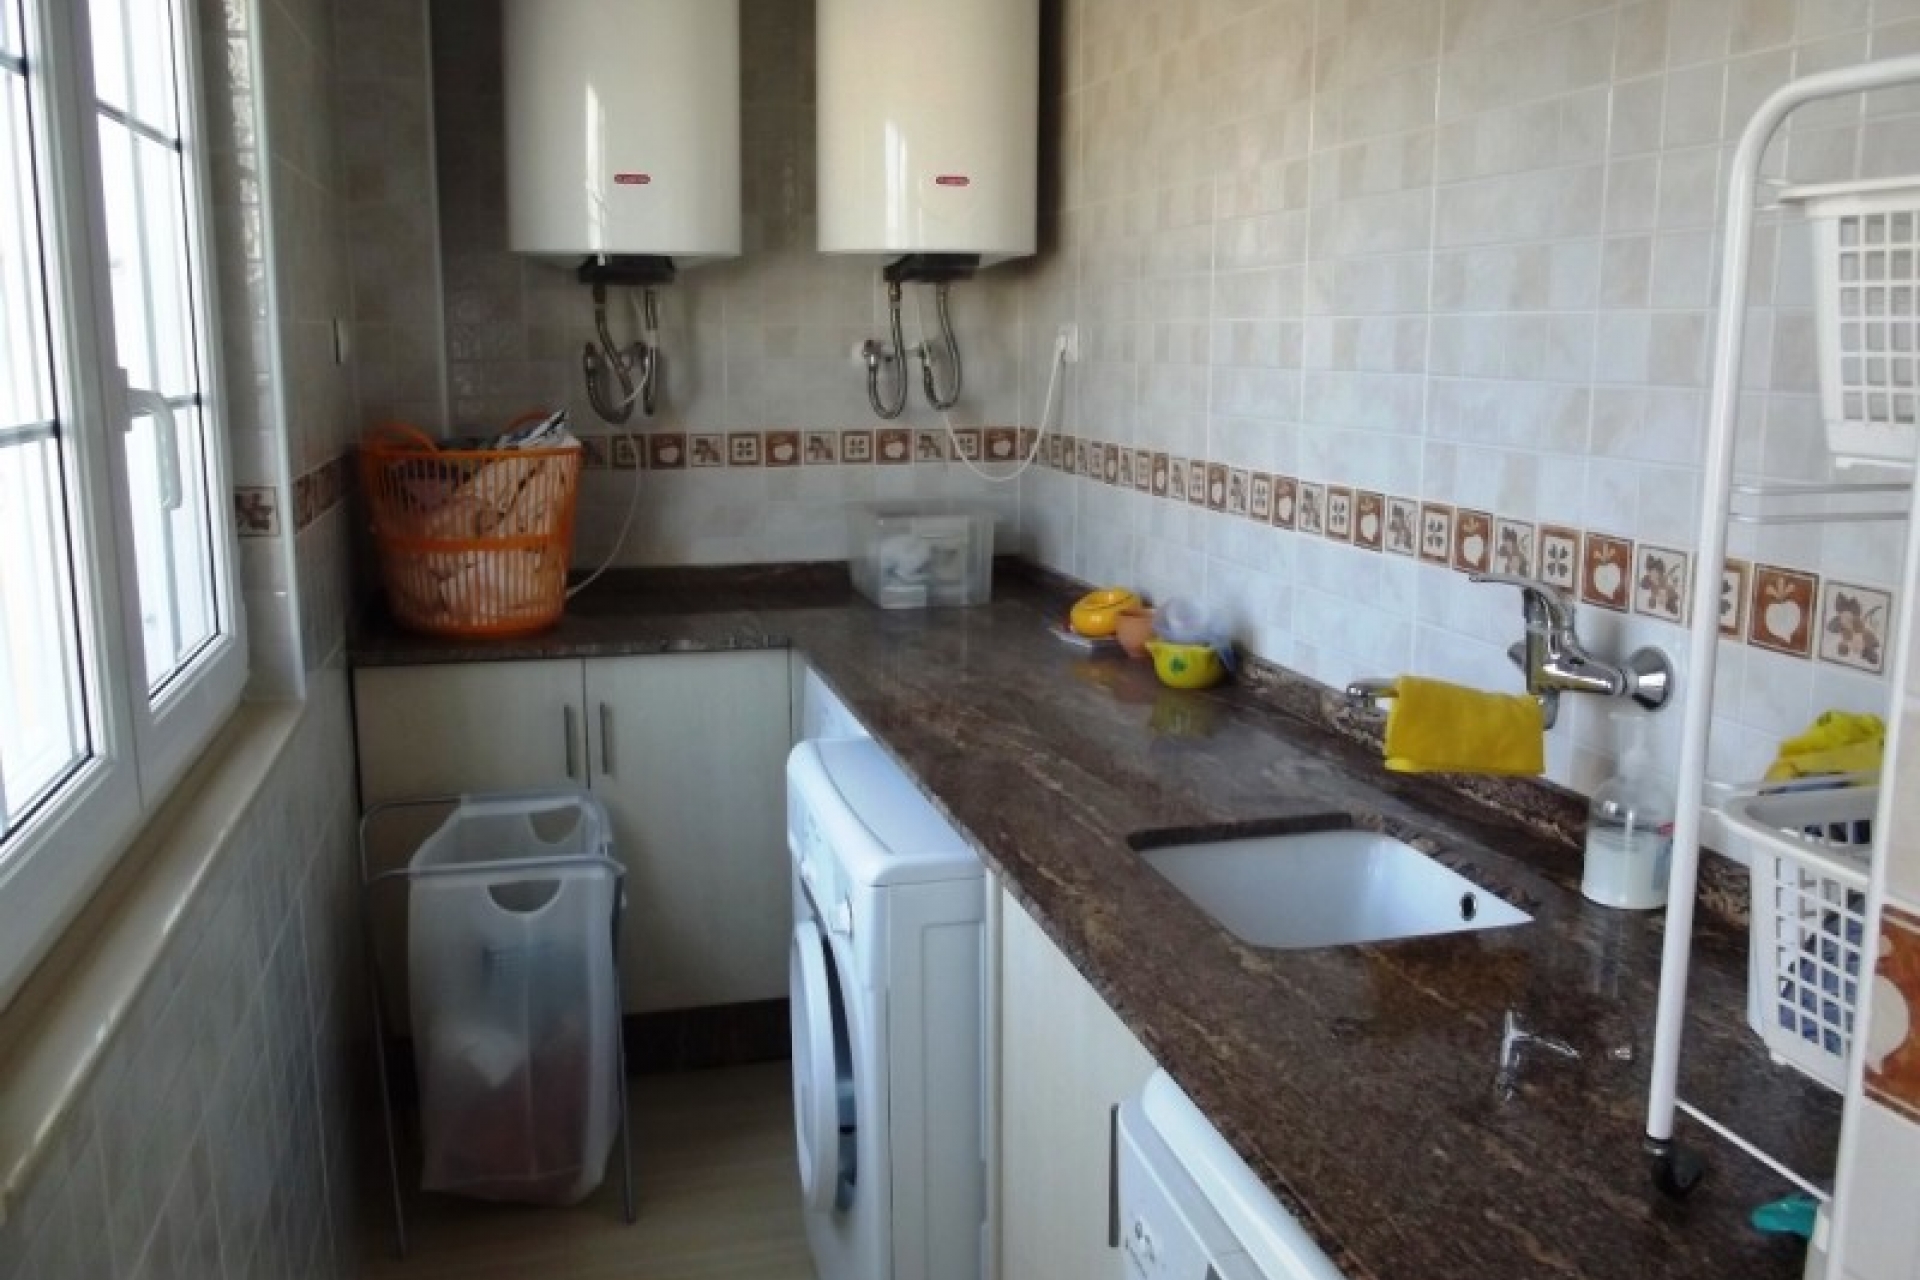 Cheap propert for sale, cheap bargain property in Heredades near Torrevieja and Guardamar, Costa Blanca, Spain for sale.